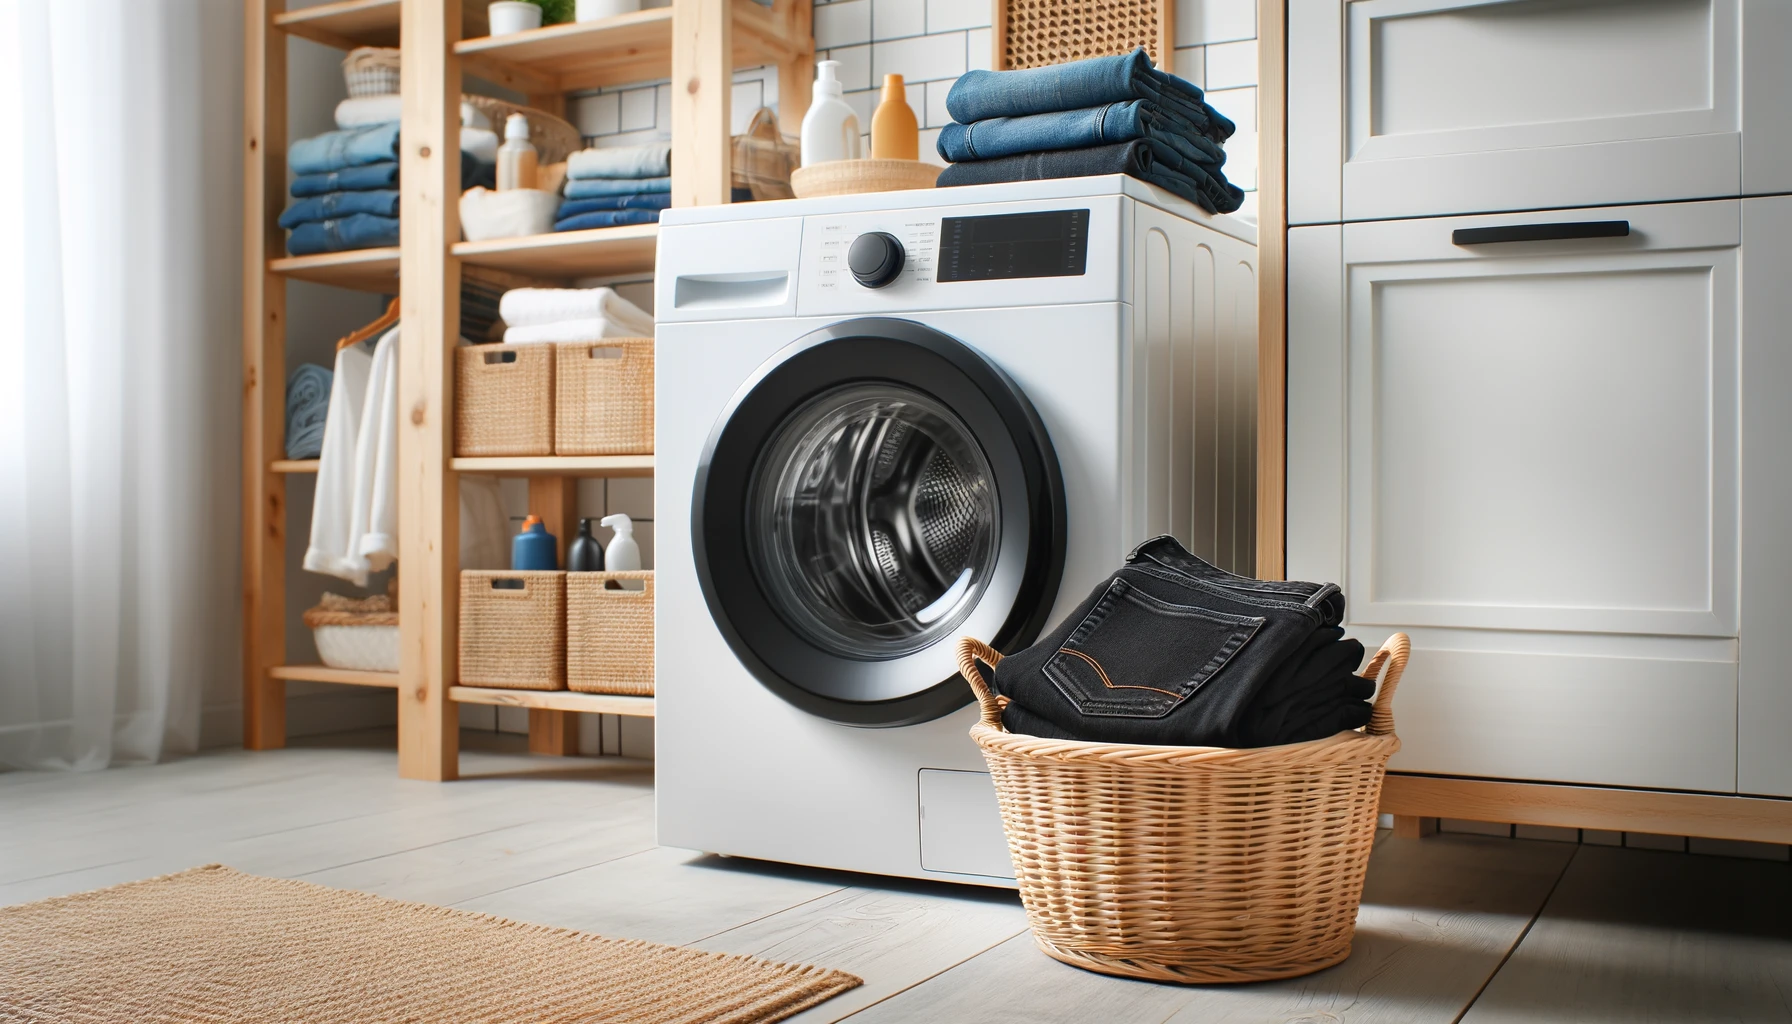 Black jeans neatly folded on a washing machine lid in a bright laundry room with wooden accents and organized shelves.